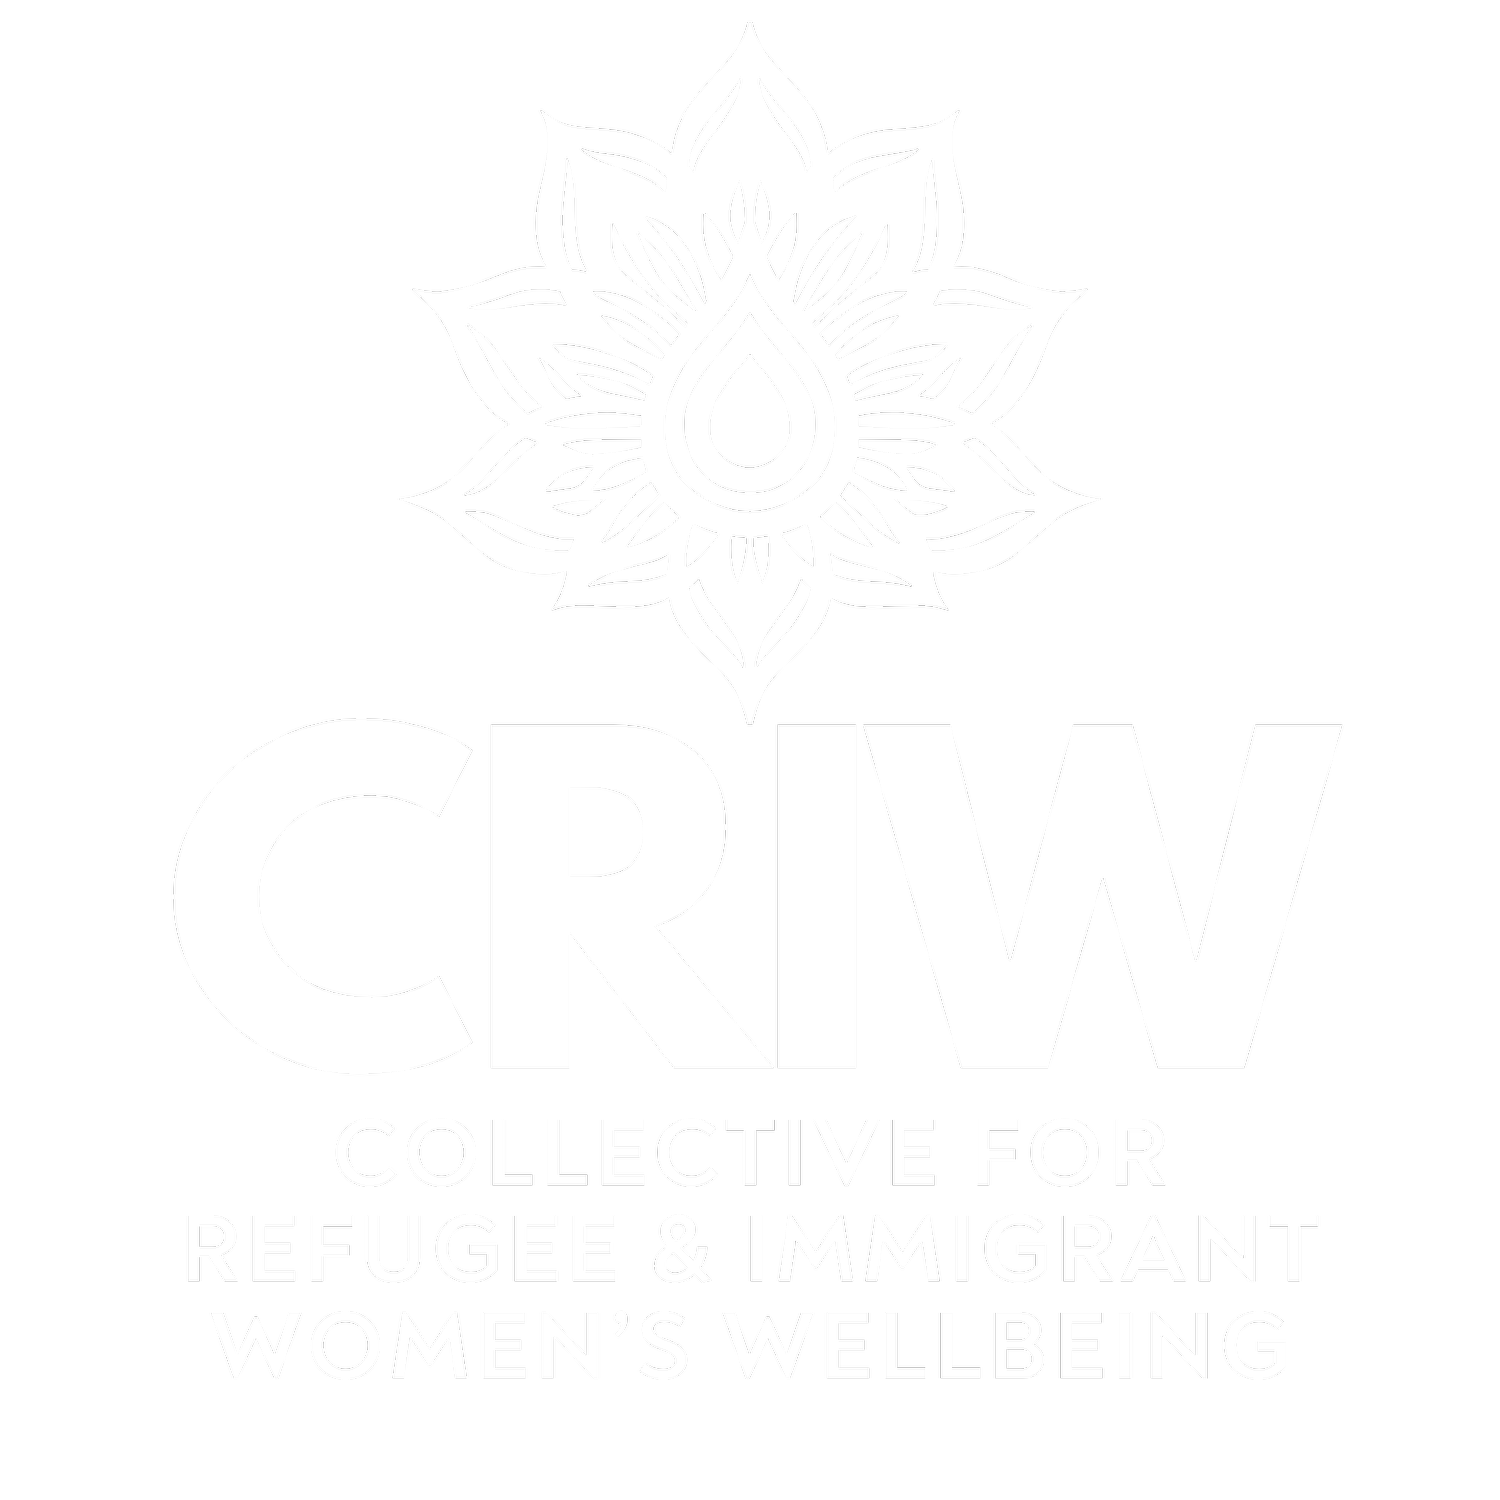 Collective for Refugee and Immigrant Women’s Wellbeing